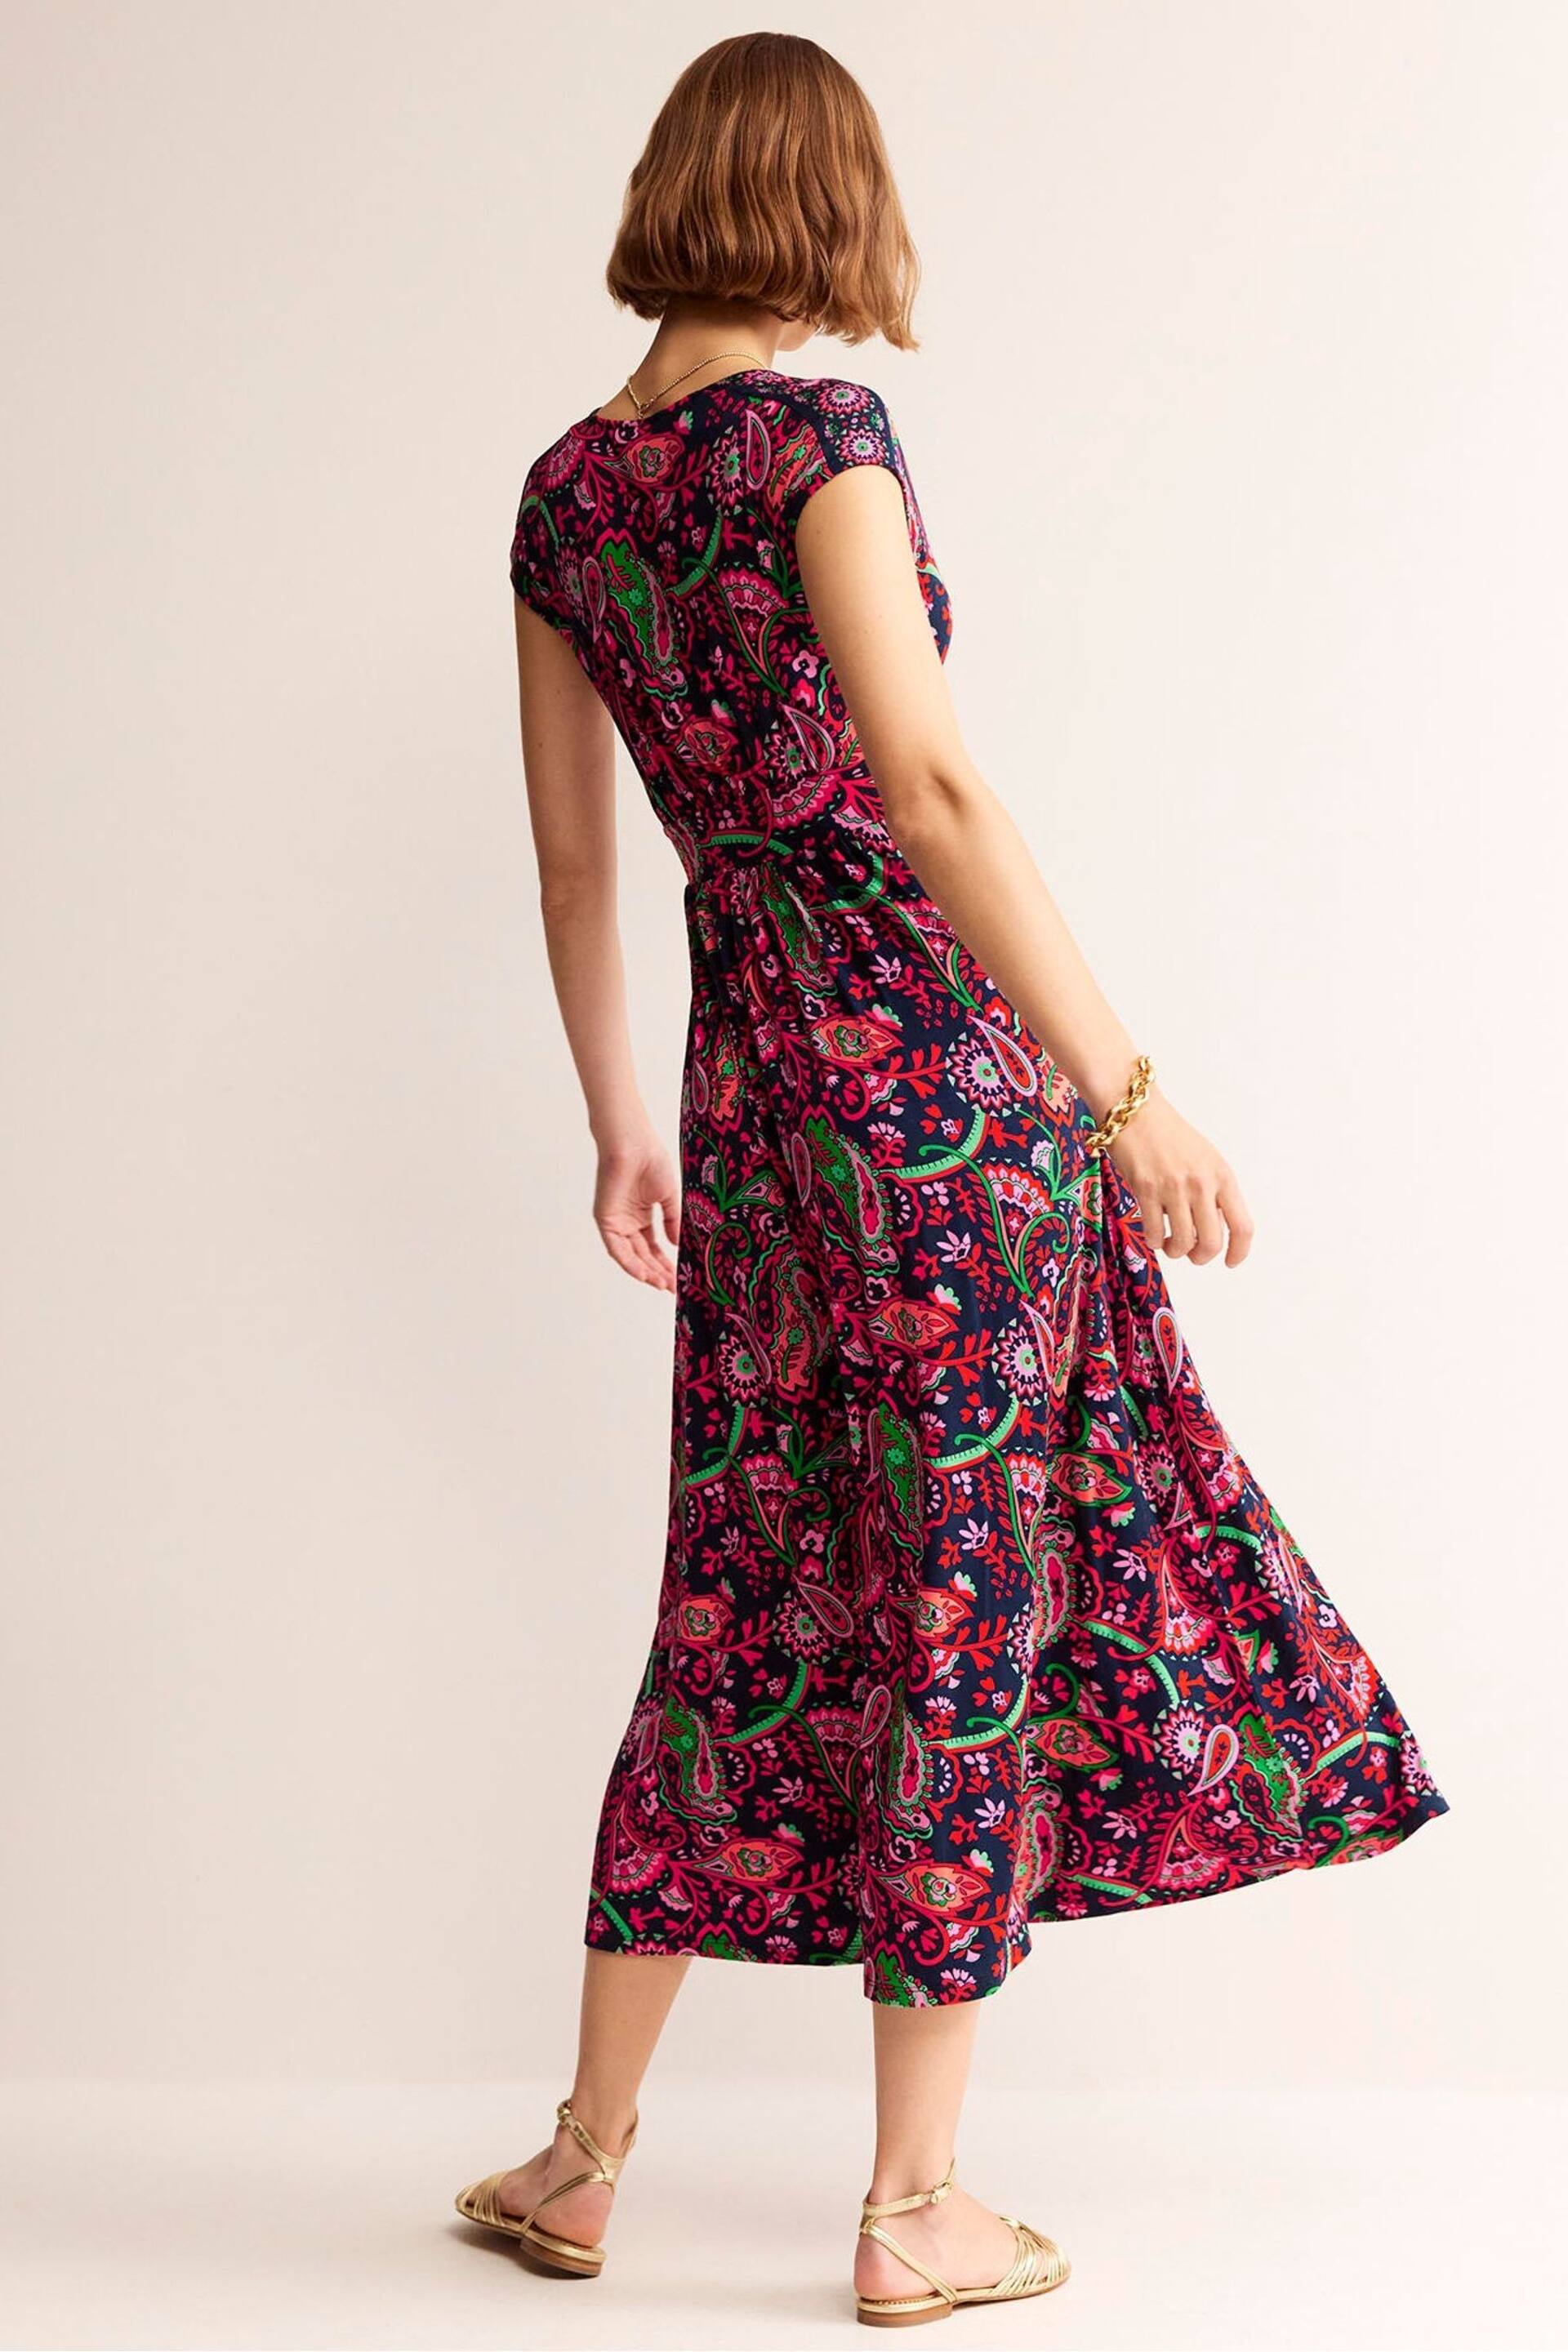 Boden Pink Vanessa Wrap Jersey Maxi Dress - Image 5 of 6